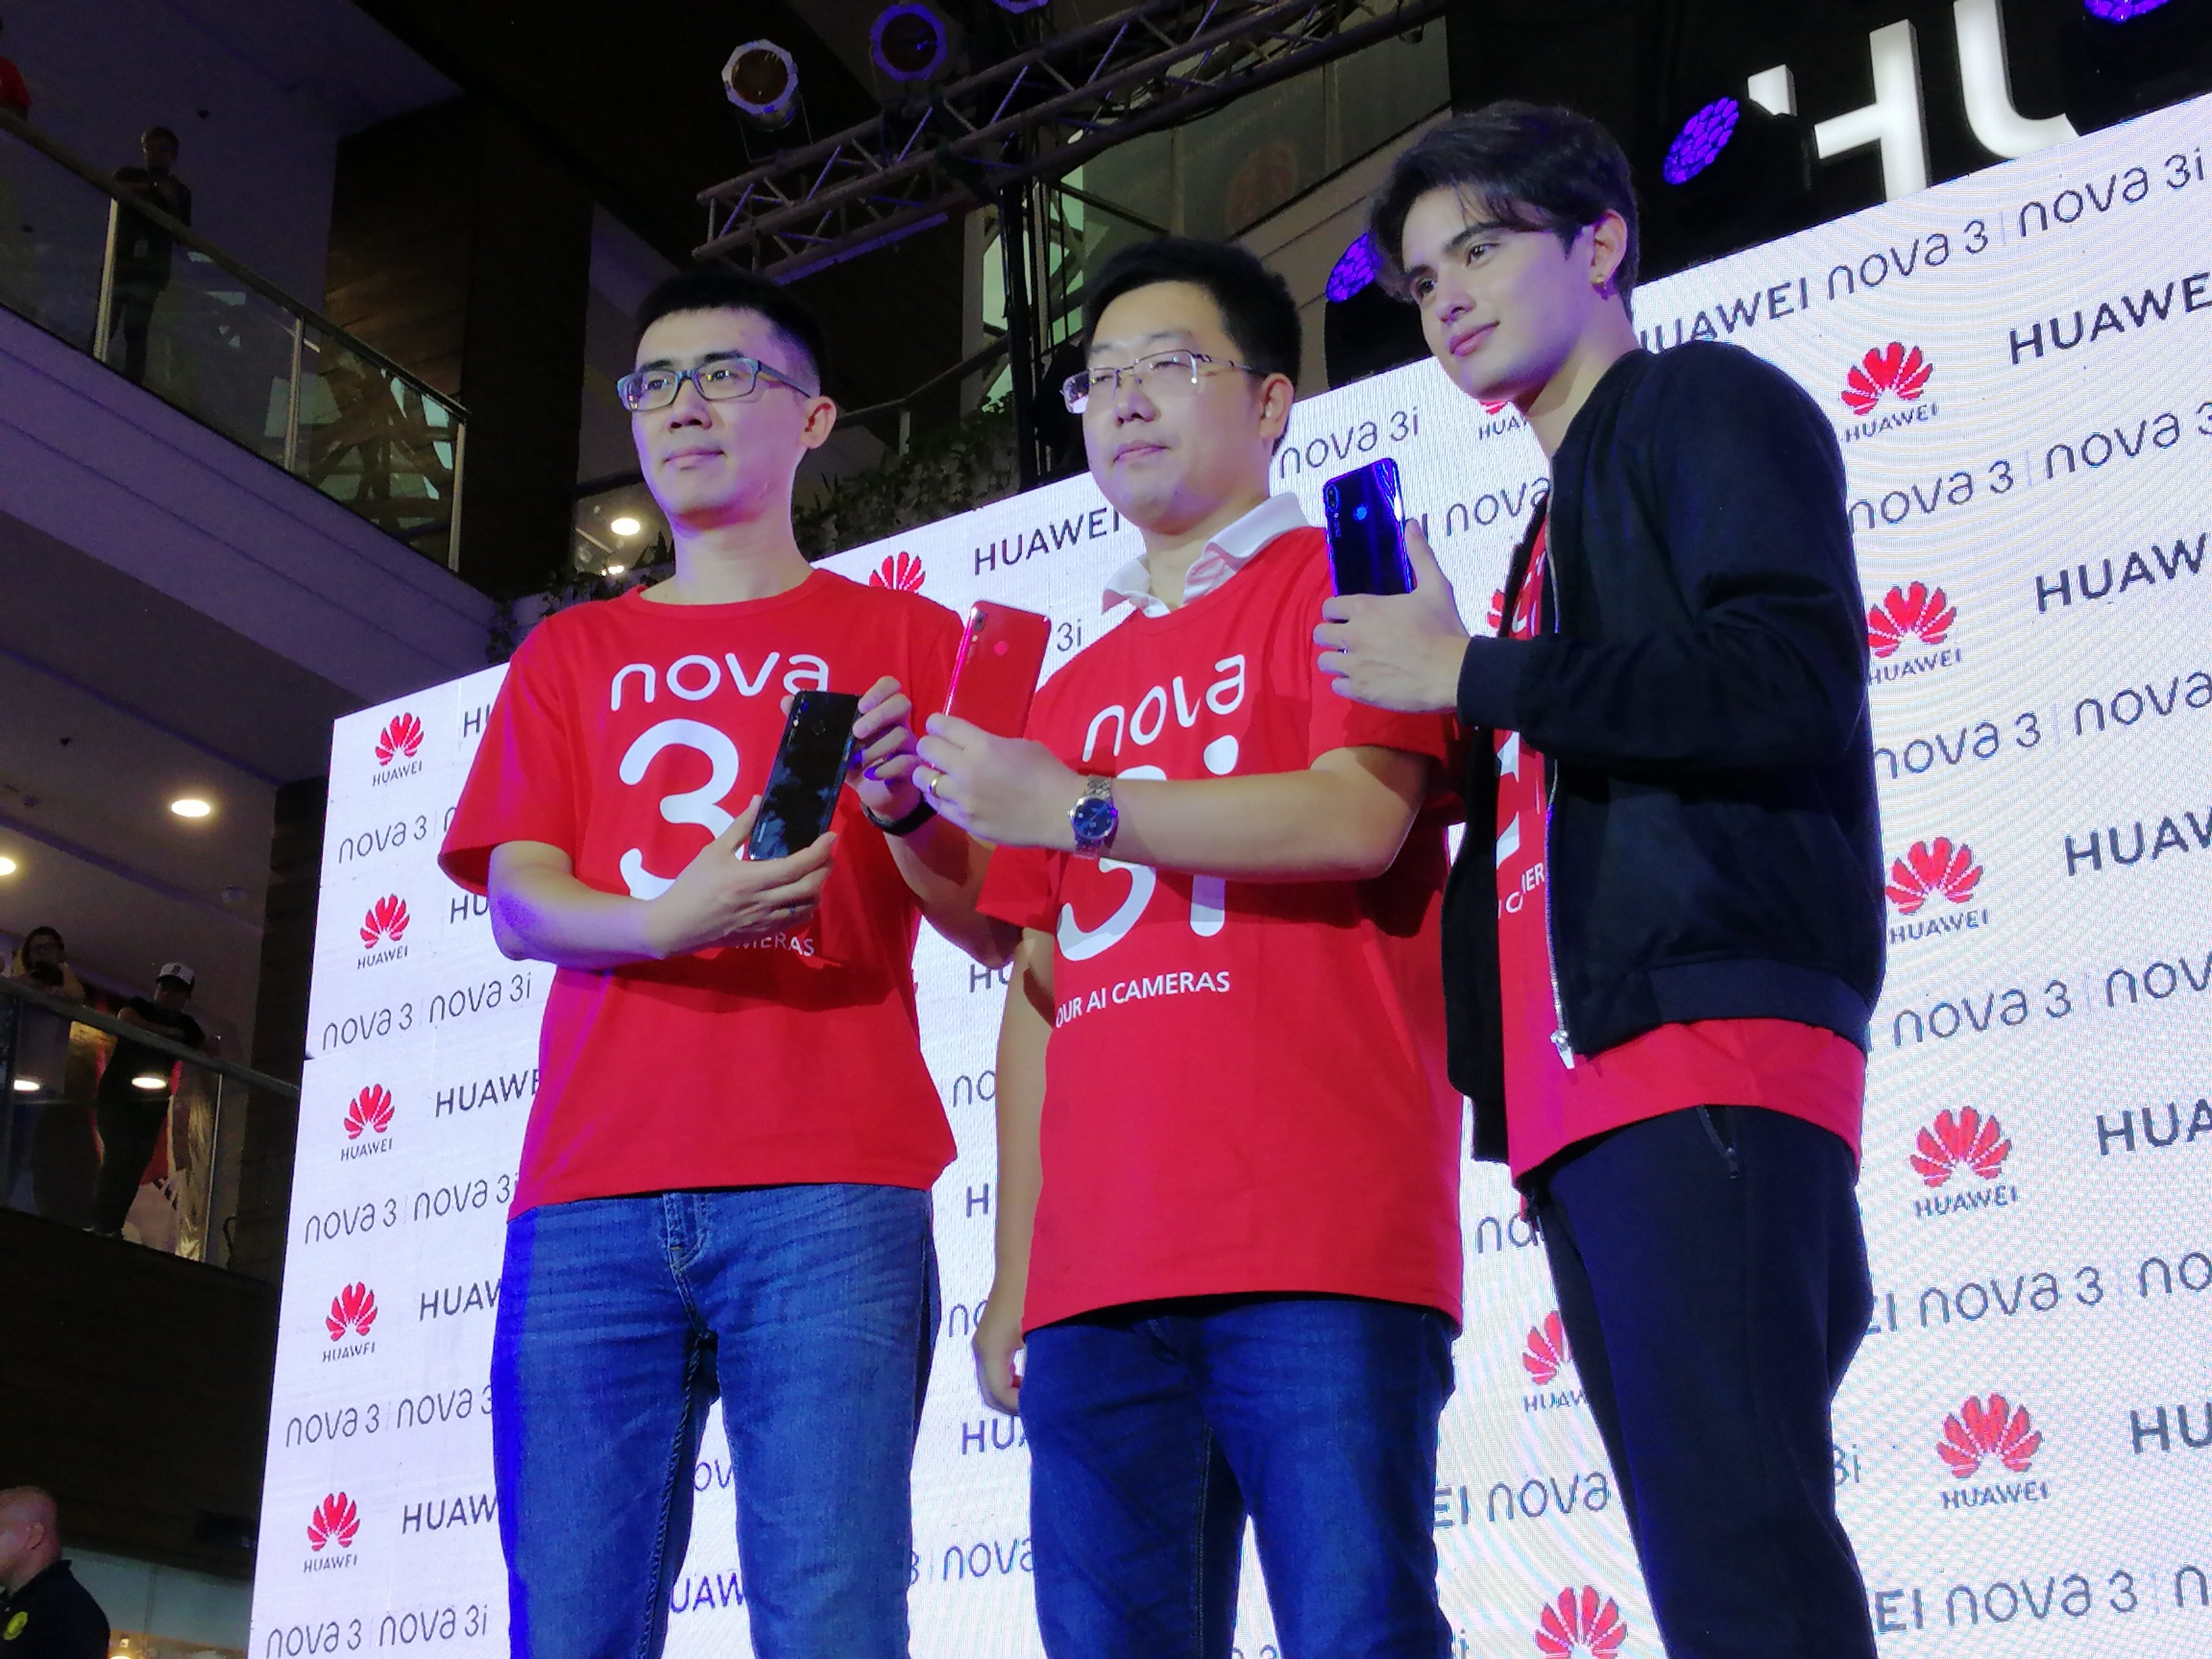 NEW ENDORSER. James Reid, pictured here with Huawei executives, has been tapped as an endorser for the Chinese brand. Photo by Kyle Chua/Rappler  